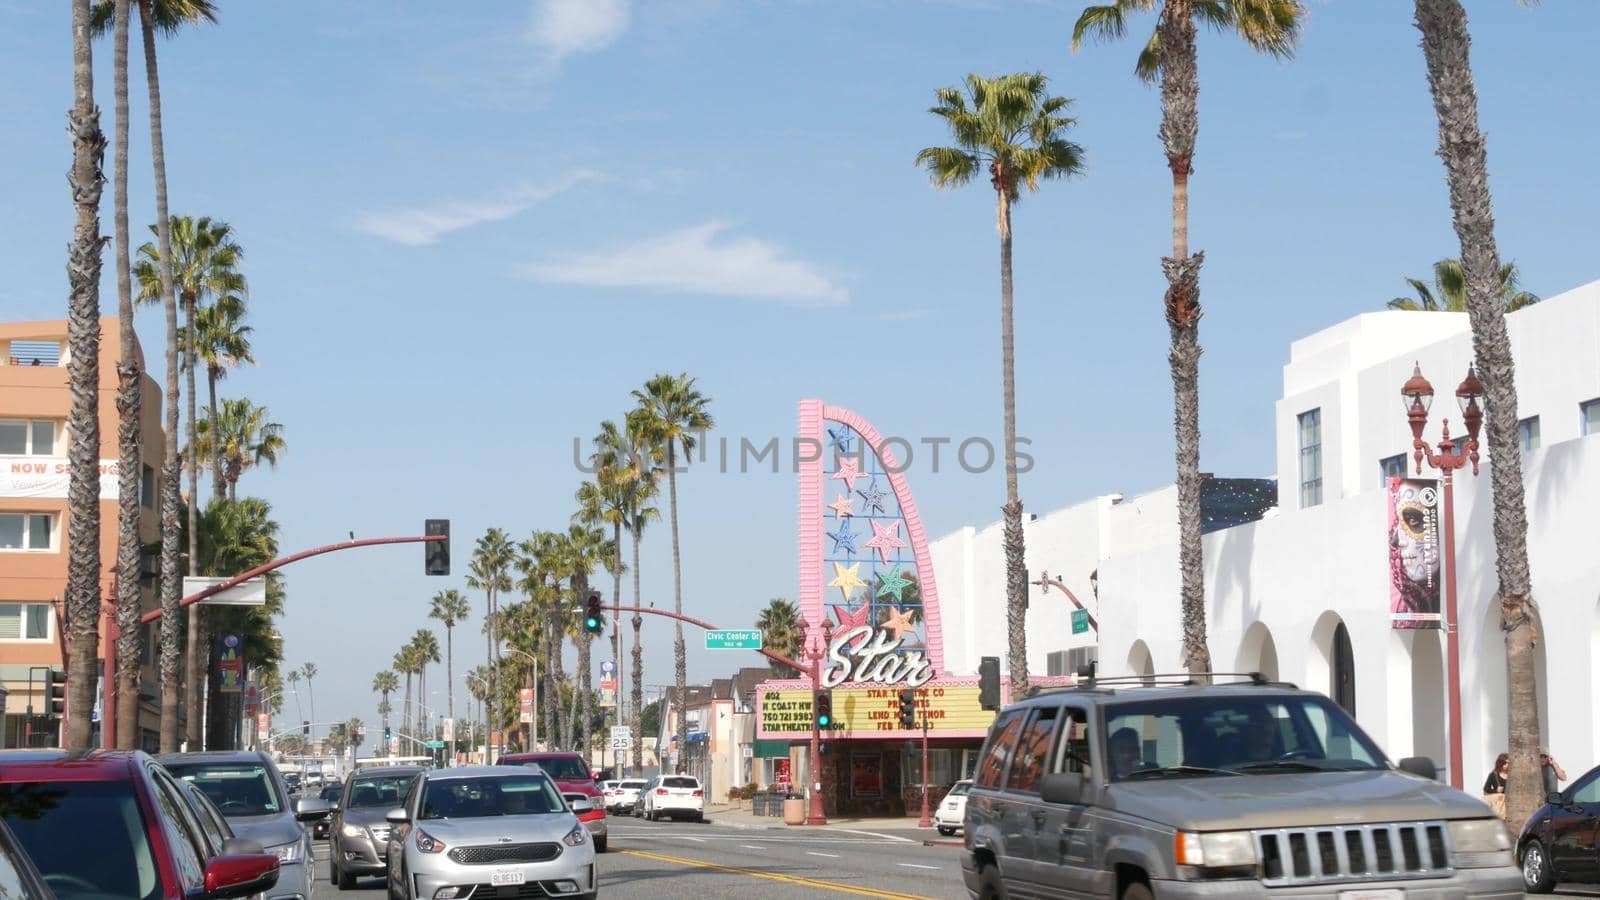 Star theatre, pacific coast highway 1, historic route 101. Palm trees on street road, California USA by DogoraSun